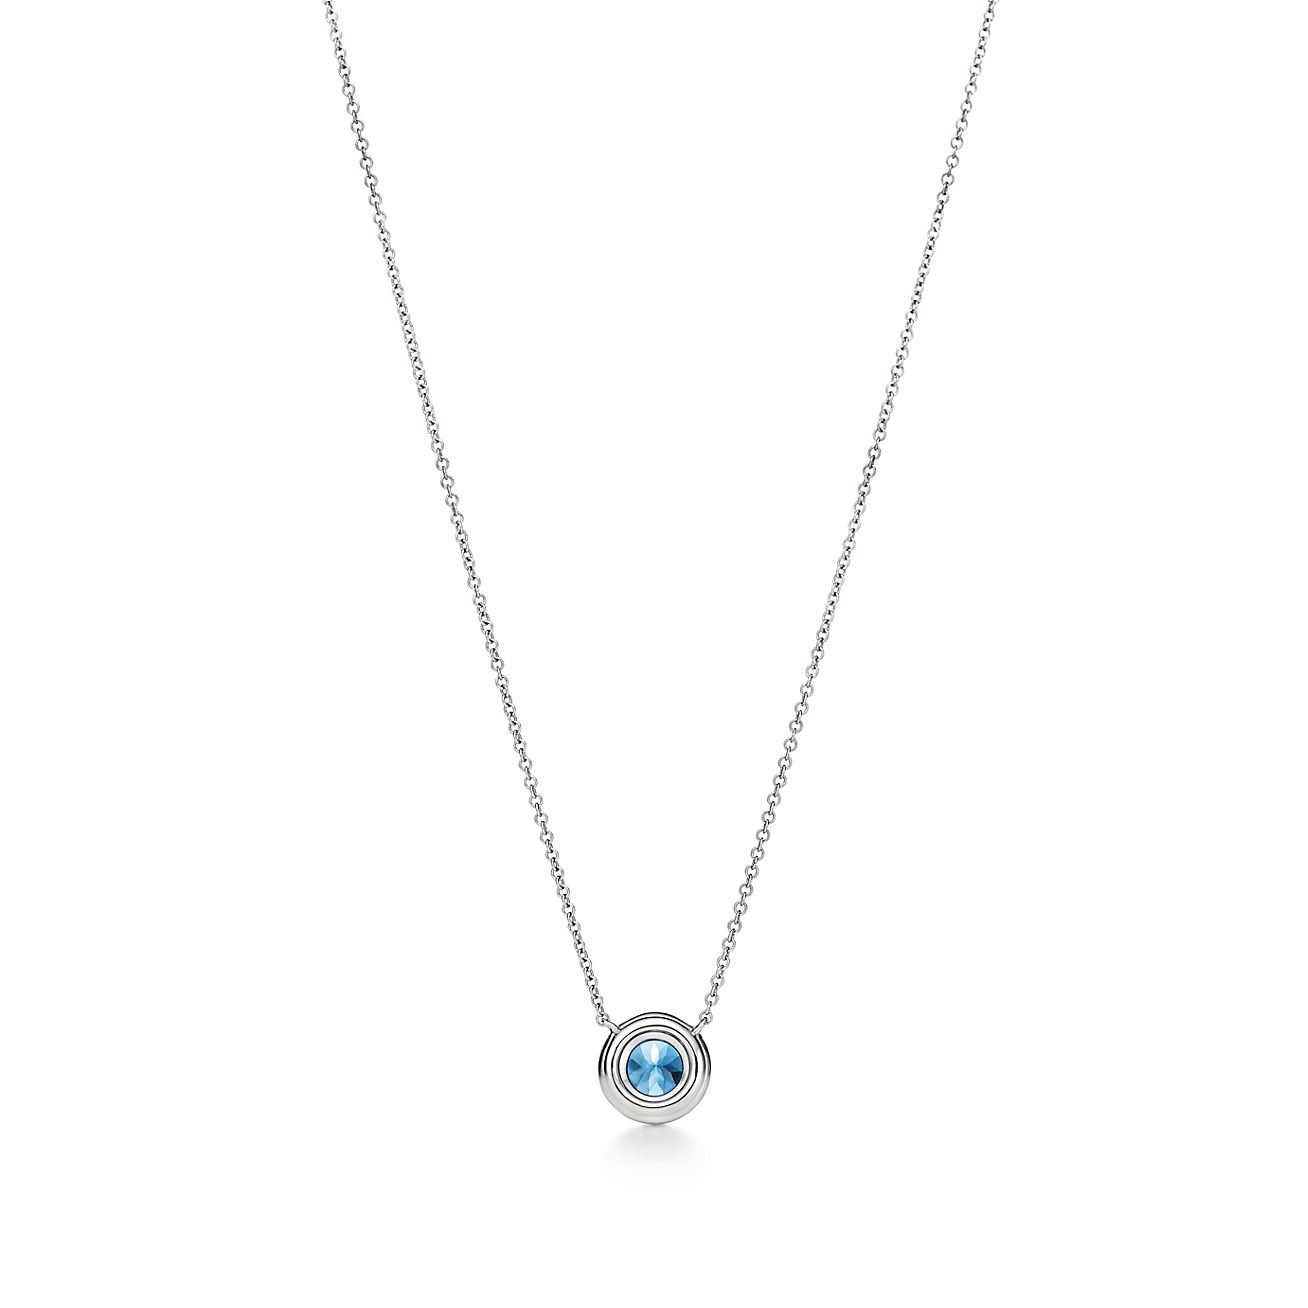 Buy [Tiffany] TIFFANY Aquamarine 0.06ct Sterling Silver Elsa Peretti Color  by the Yard Pendant Necklace 25224884 [Parallel imports] from Japan - Buy  authentic Plus exclusive items from Japan | ZenPlus